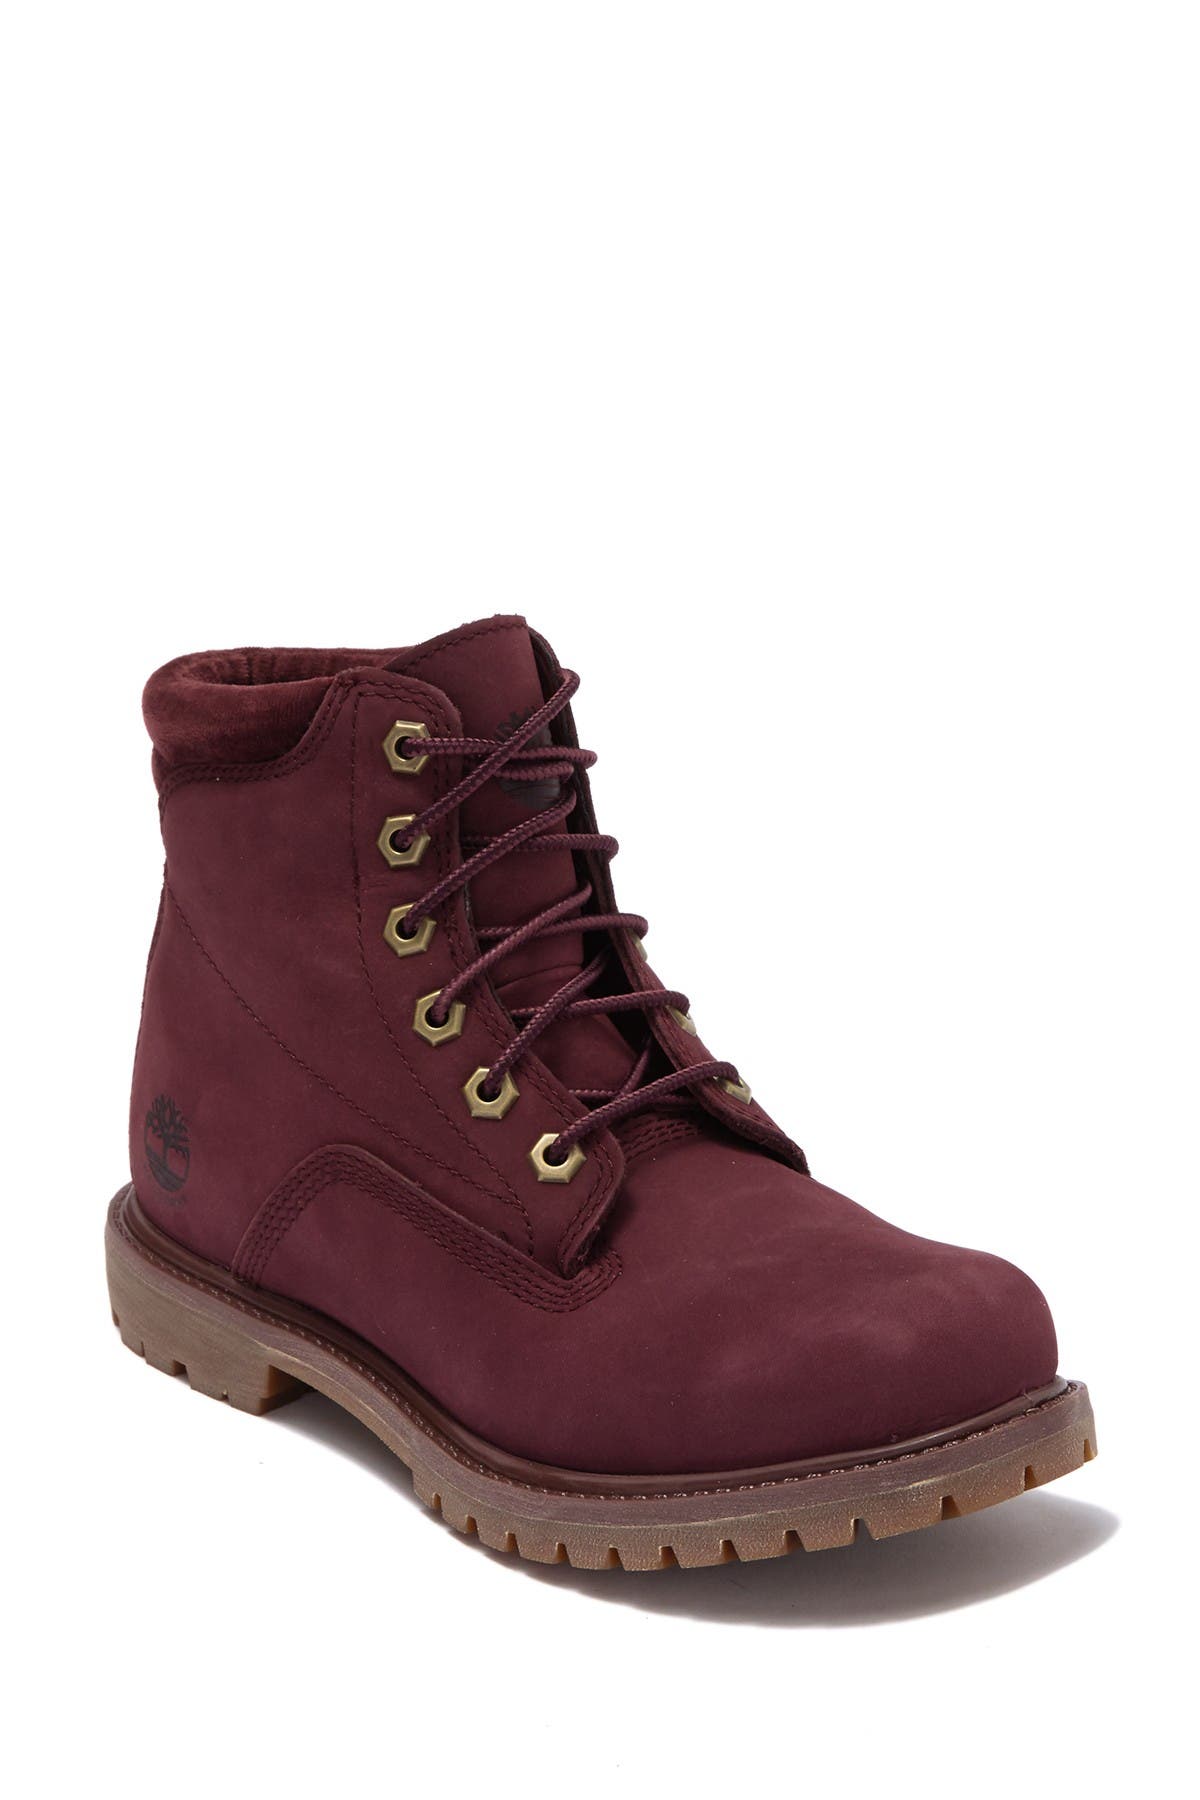 timberland boots nordstrom rack